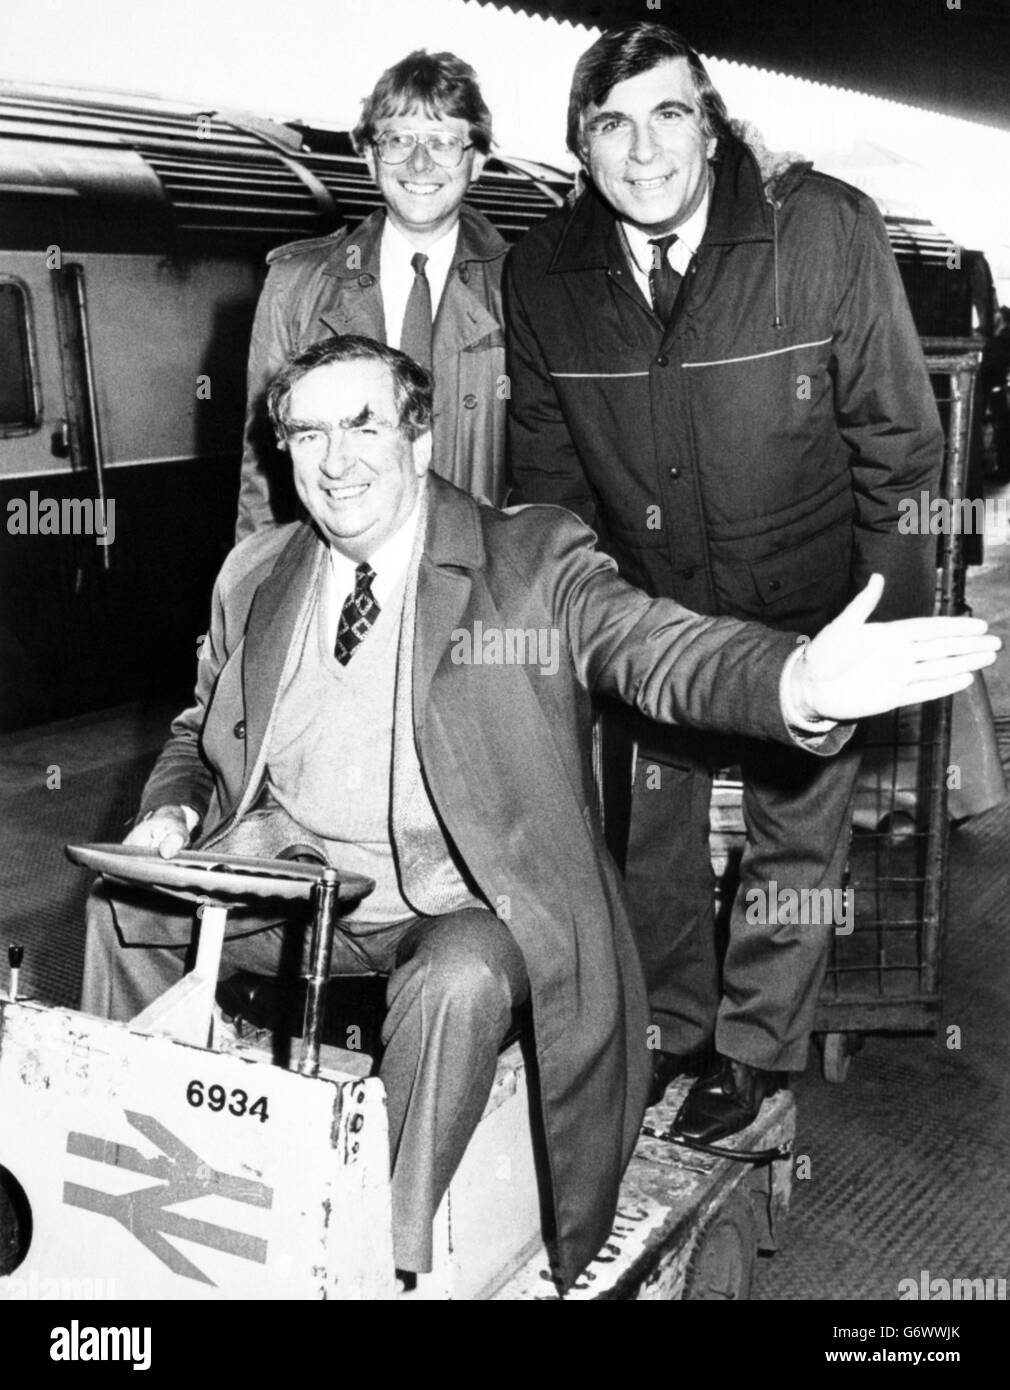 Labour MP Denis Healey (in the driving seat) taking a left turn at Bristol Temple Meads Station. Along for the ride are Labour prospective parliamentary candidates Roger Berry (l) and Terry Walker. Stock Photo